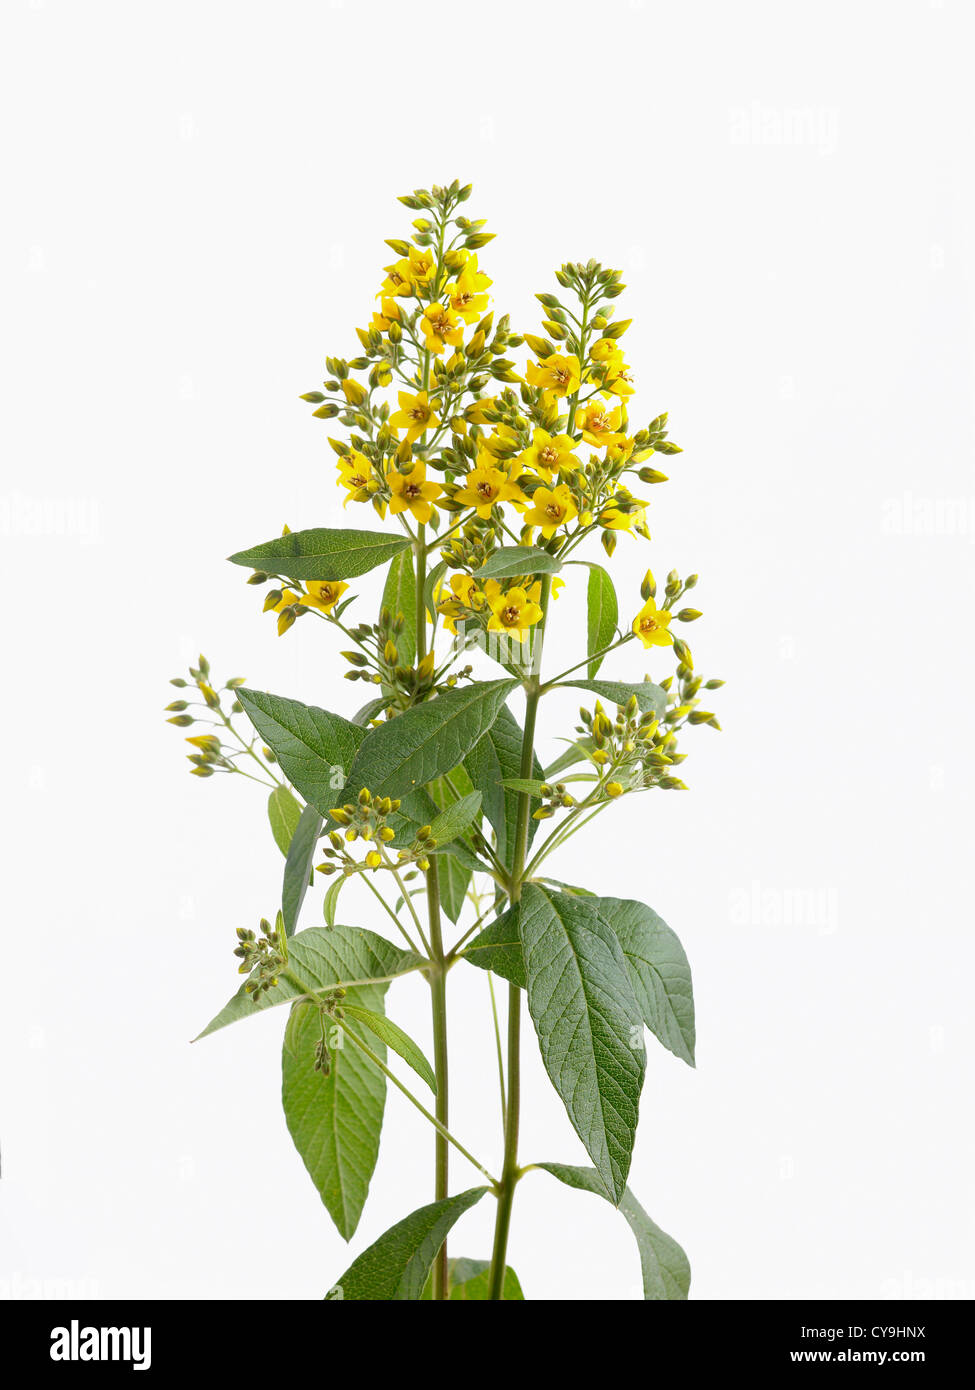 Lysimachia vulgaris, Yellow loosestrife flowers on tall stems against a white background Stock Photo